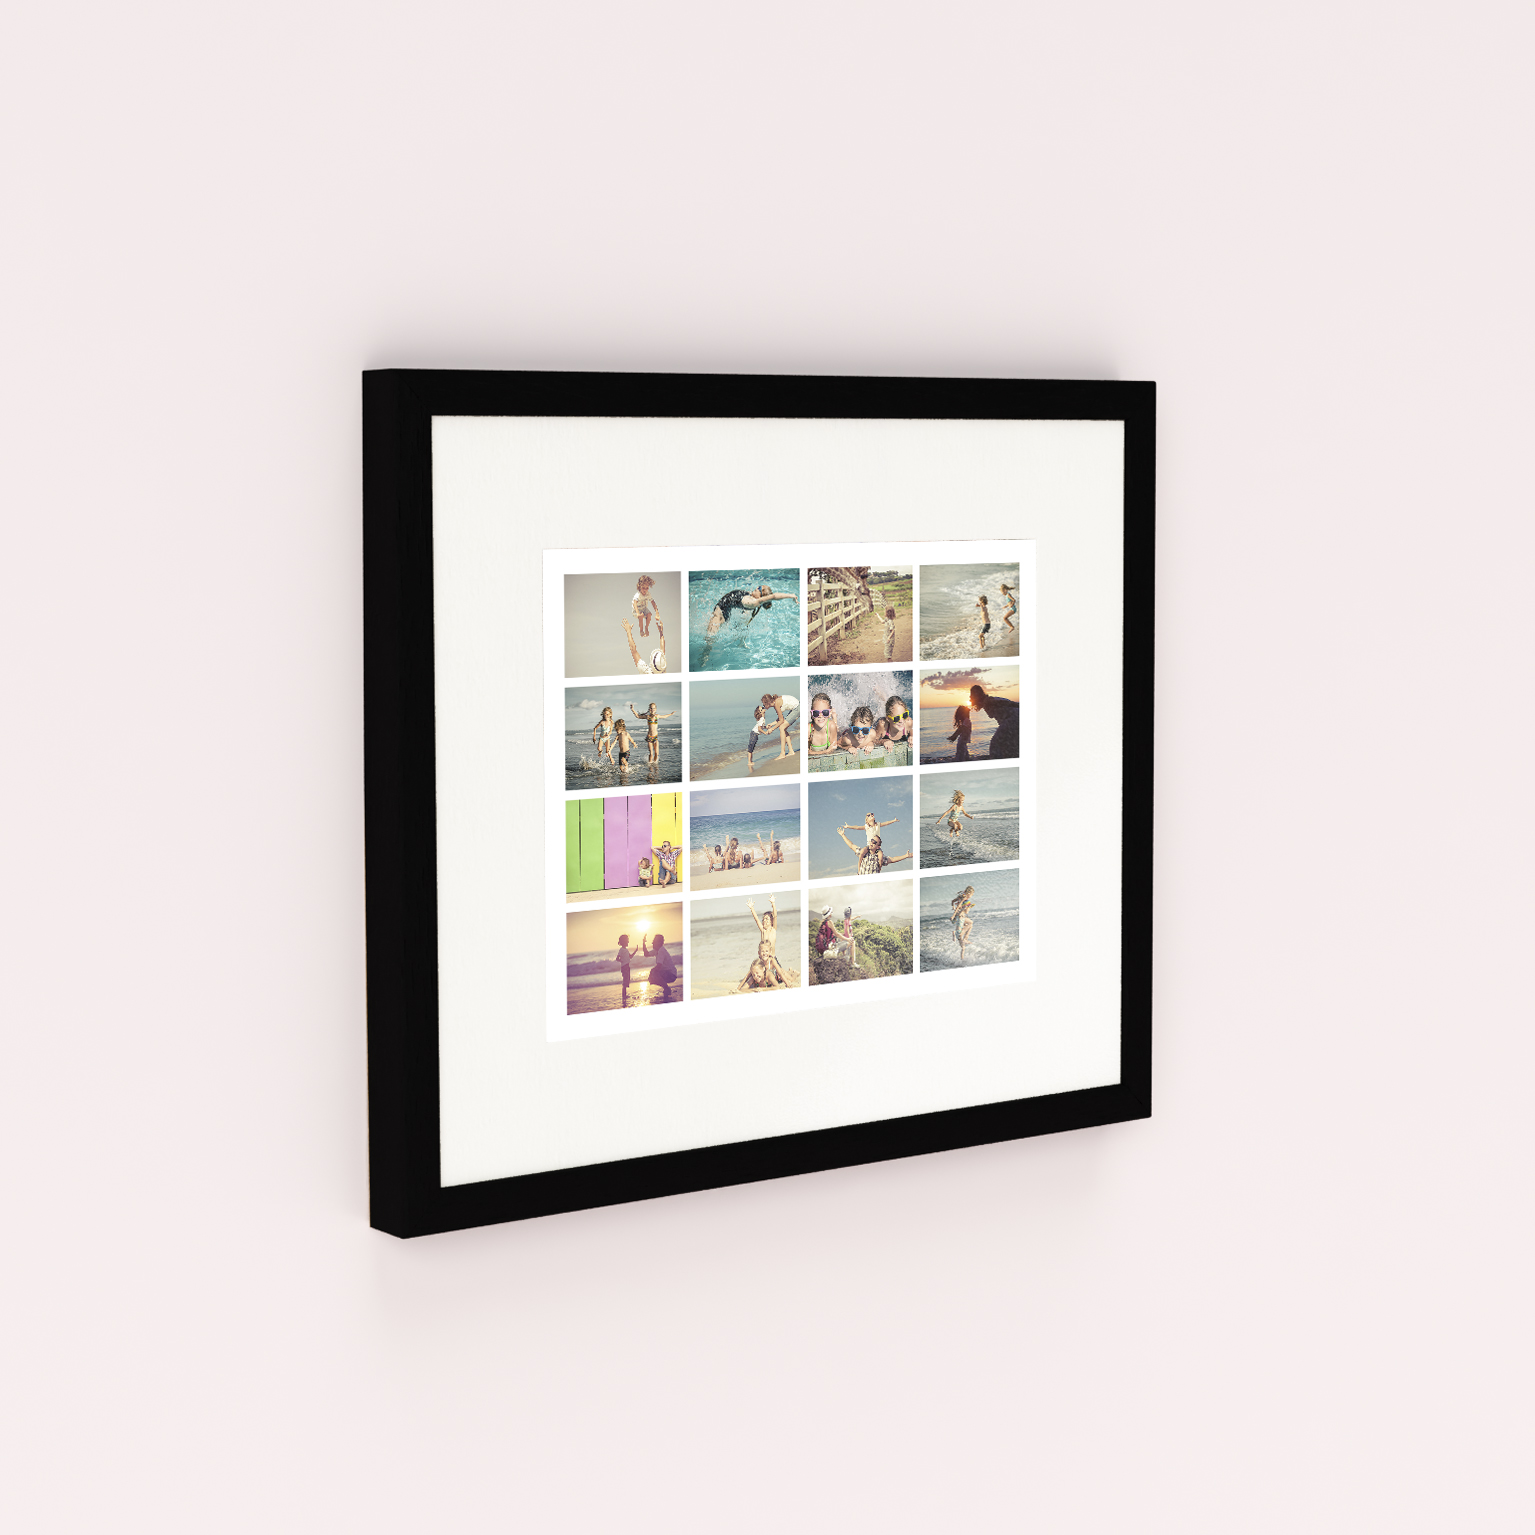 Jumble Framed Photo Prints - Create a stunning collage of memories with this landscape-oriented design, elegantly showcasing 10+ photos in a cream frame. Crafted from durable materials, these prints ensure vibrant keepsakes resistant to fading. Preserve your memories in style with our versatile Jumble framed photo prints.